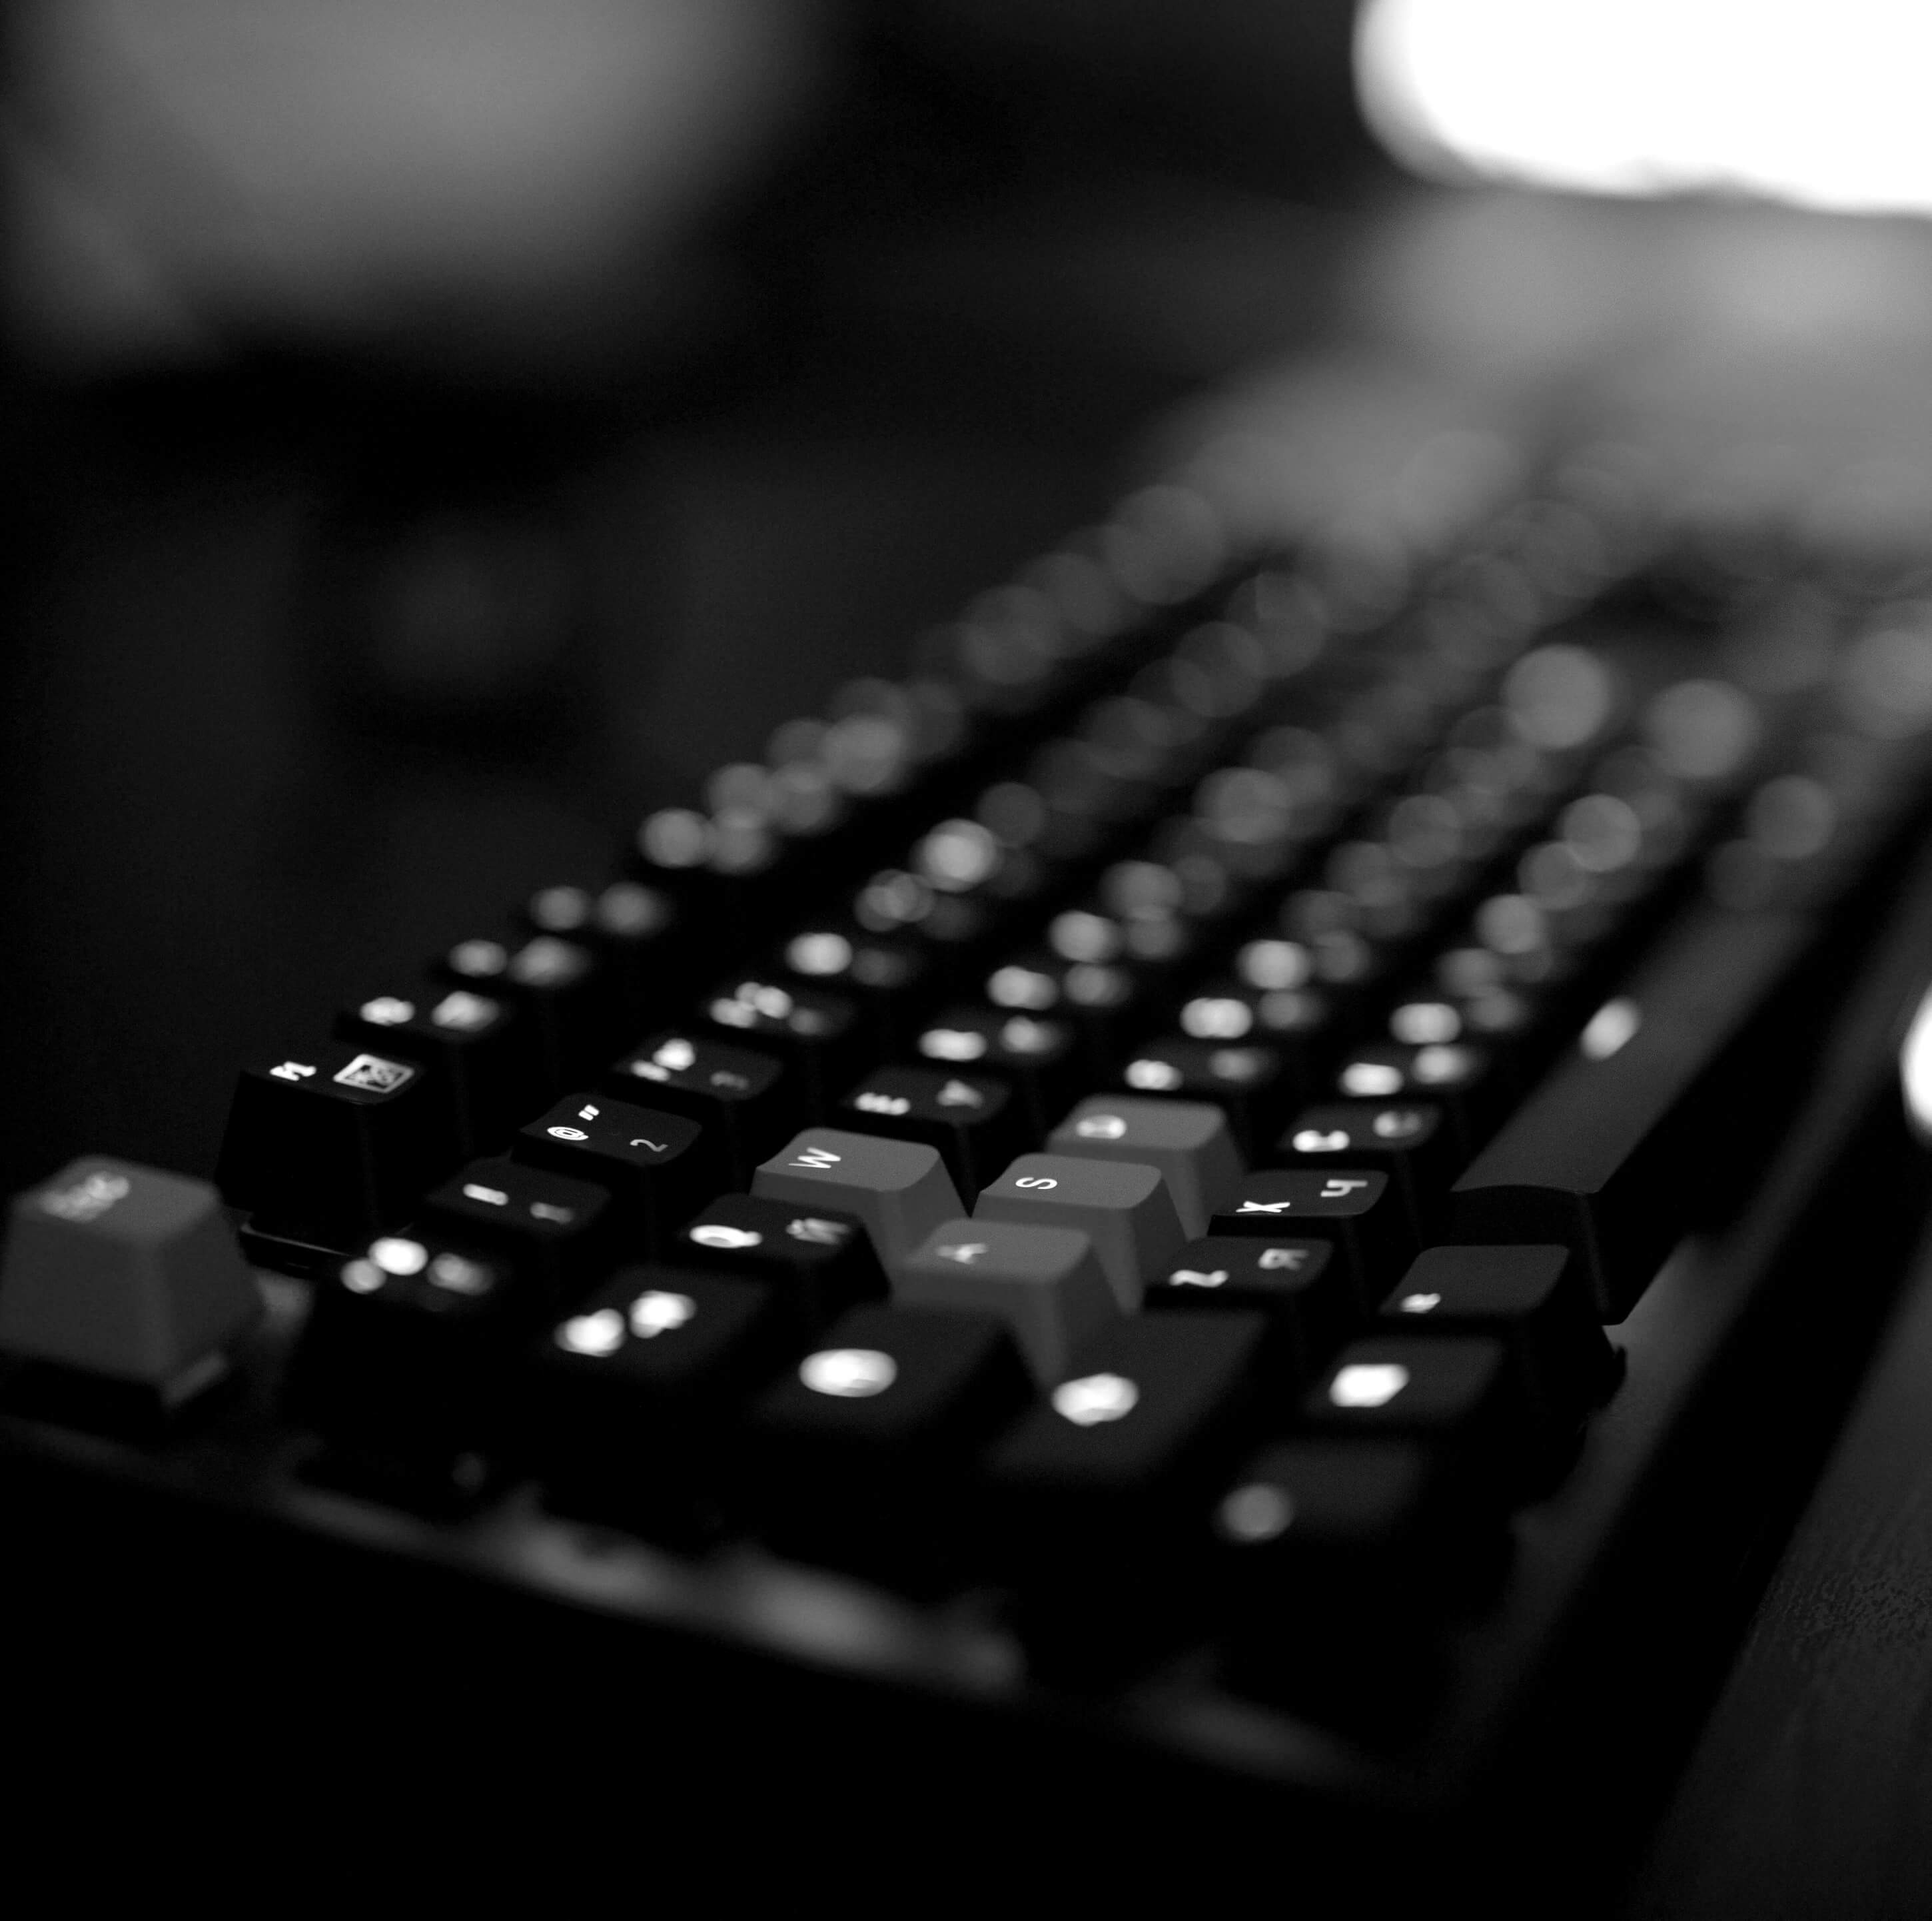 Background image of a keyboard